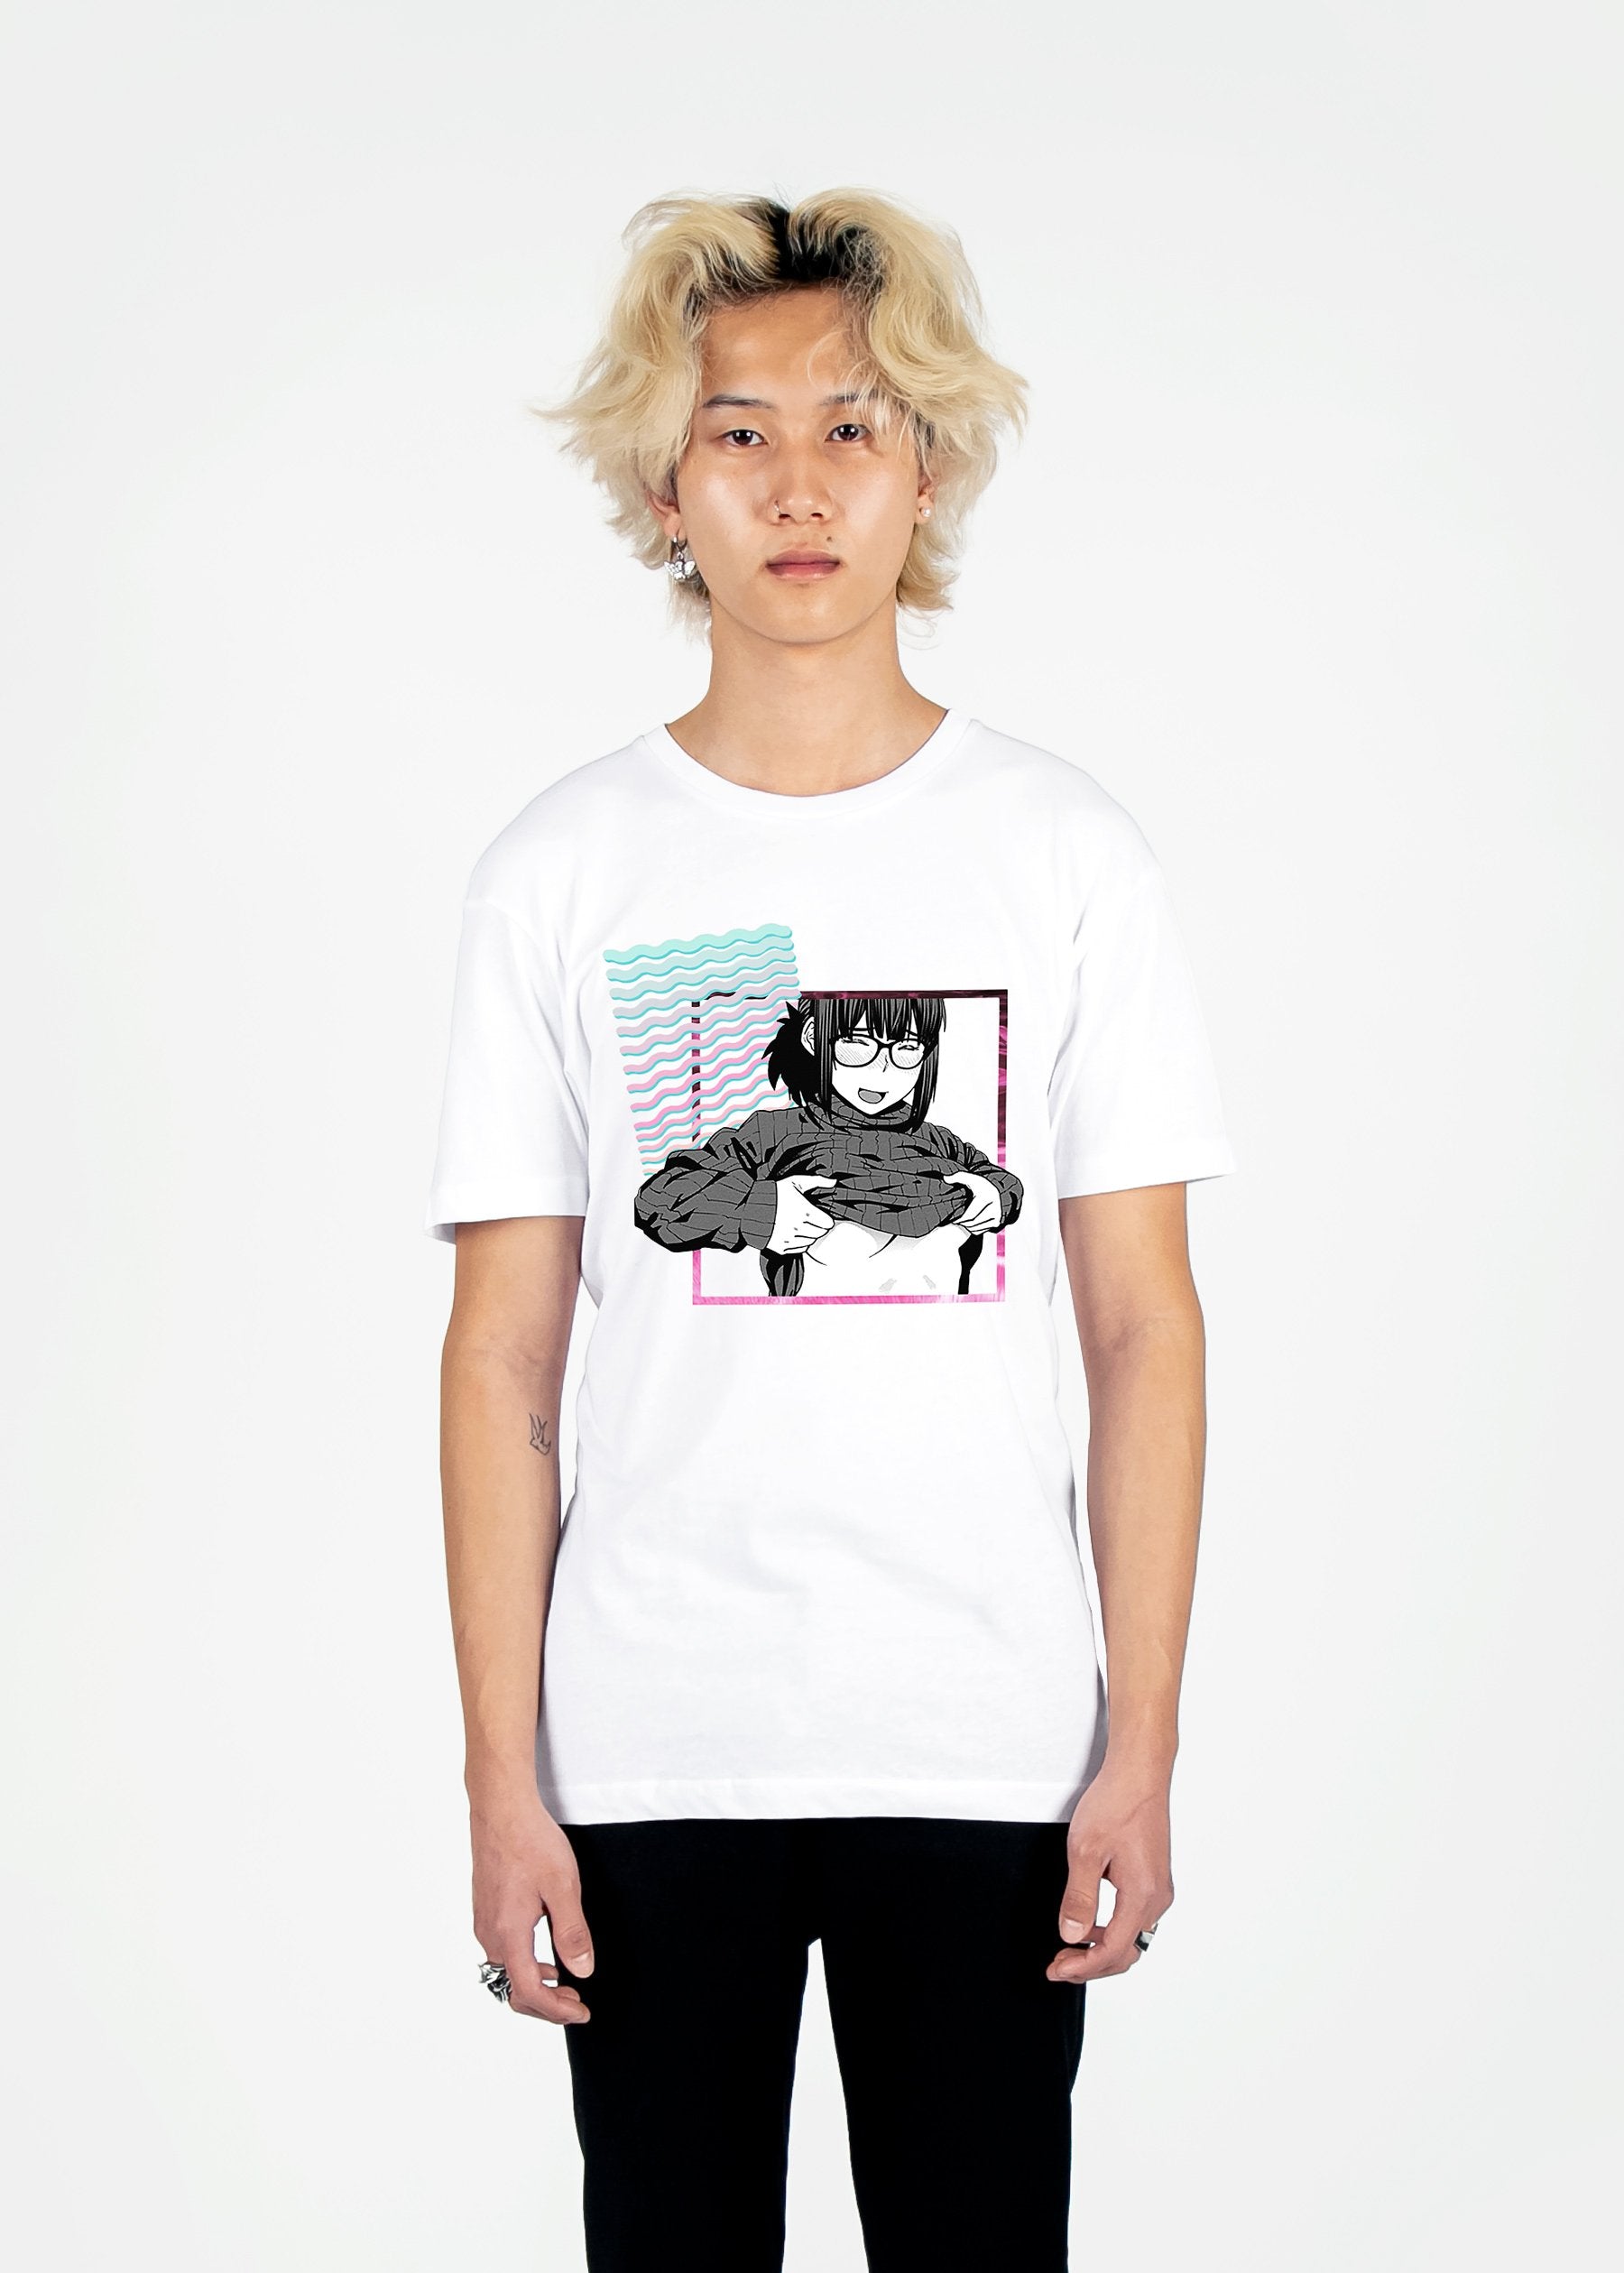 Private Moment Tee Graphic Tee Vapor95 White S